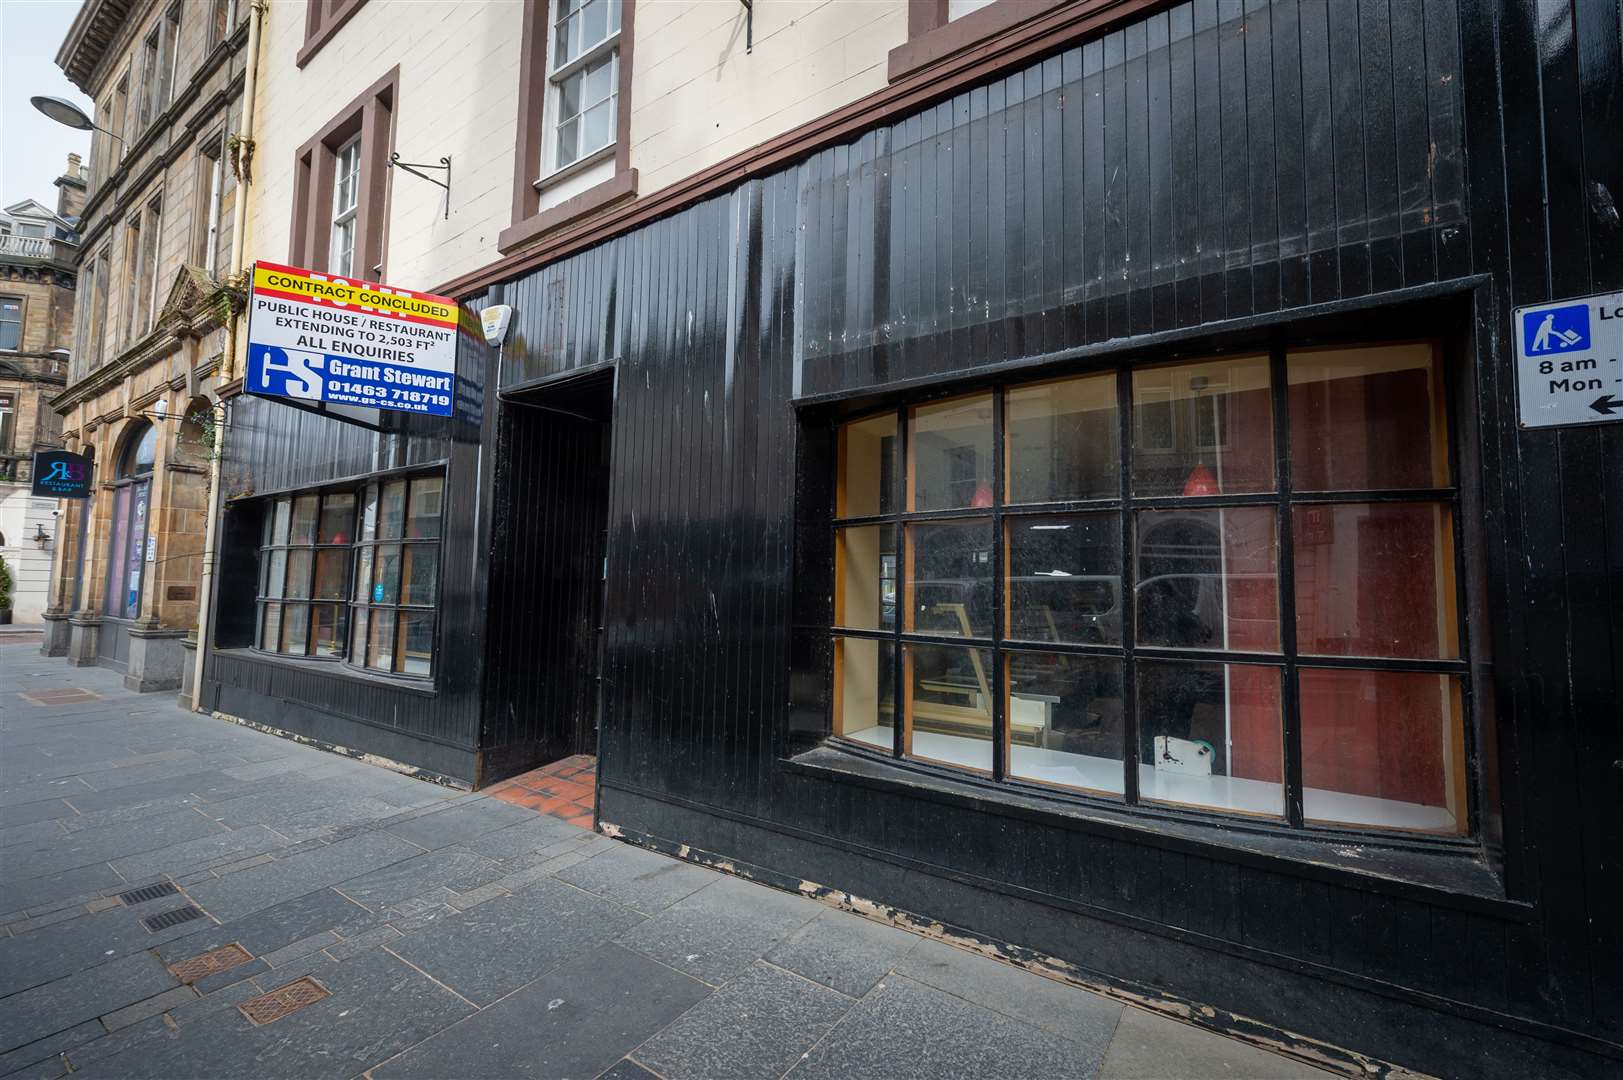 The empty former bakery shop in Church Street, Inverness.